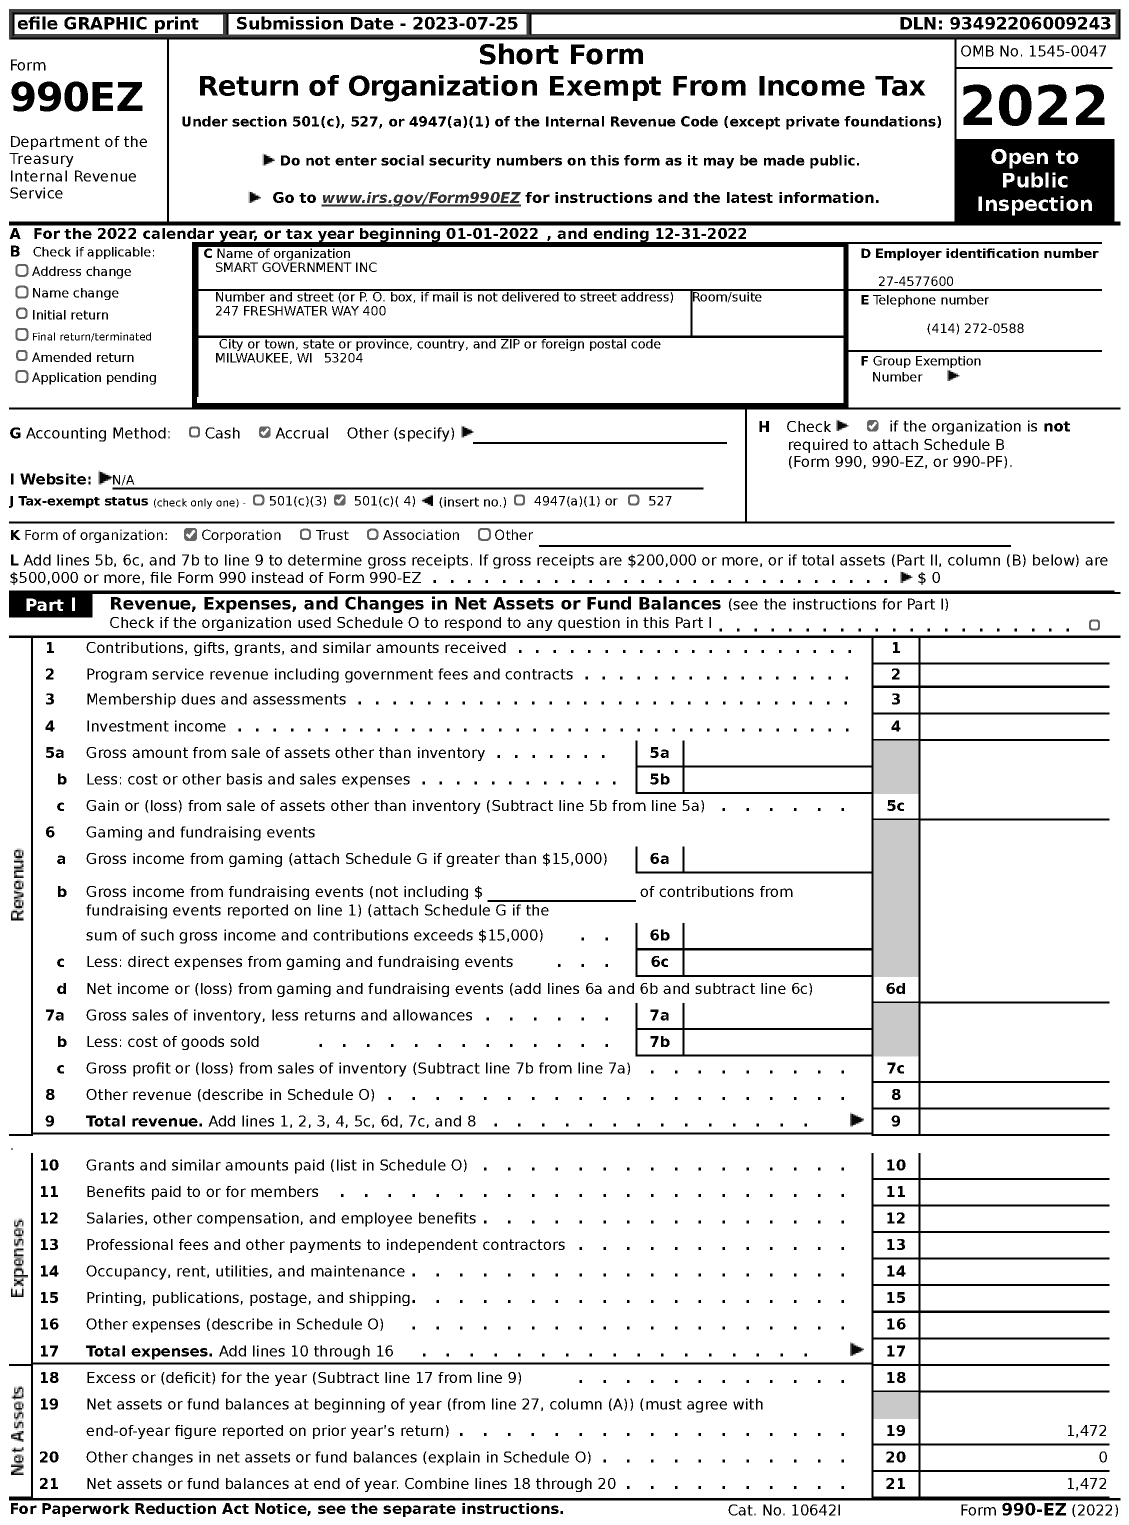 Image of first page of 2022 Form 990EZ for Smart Government